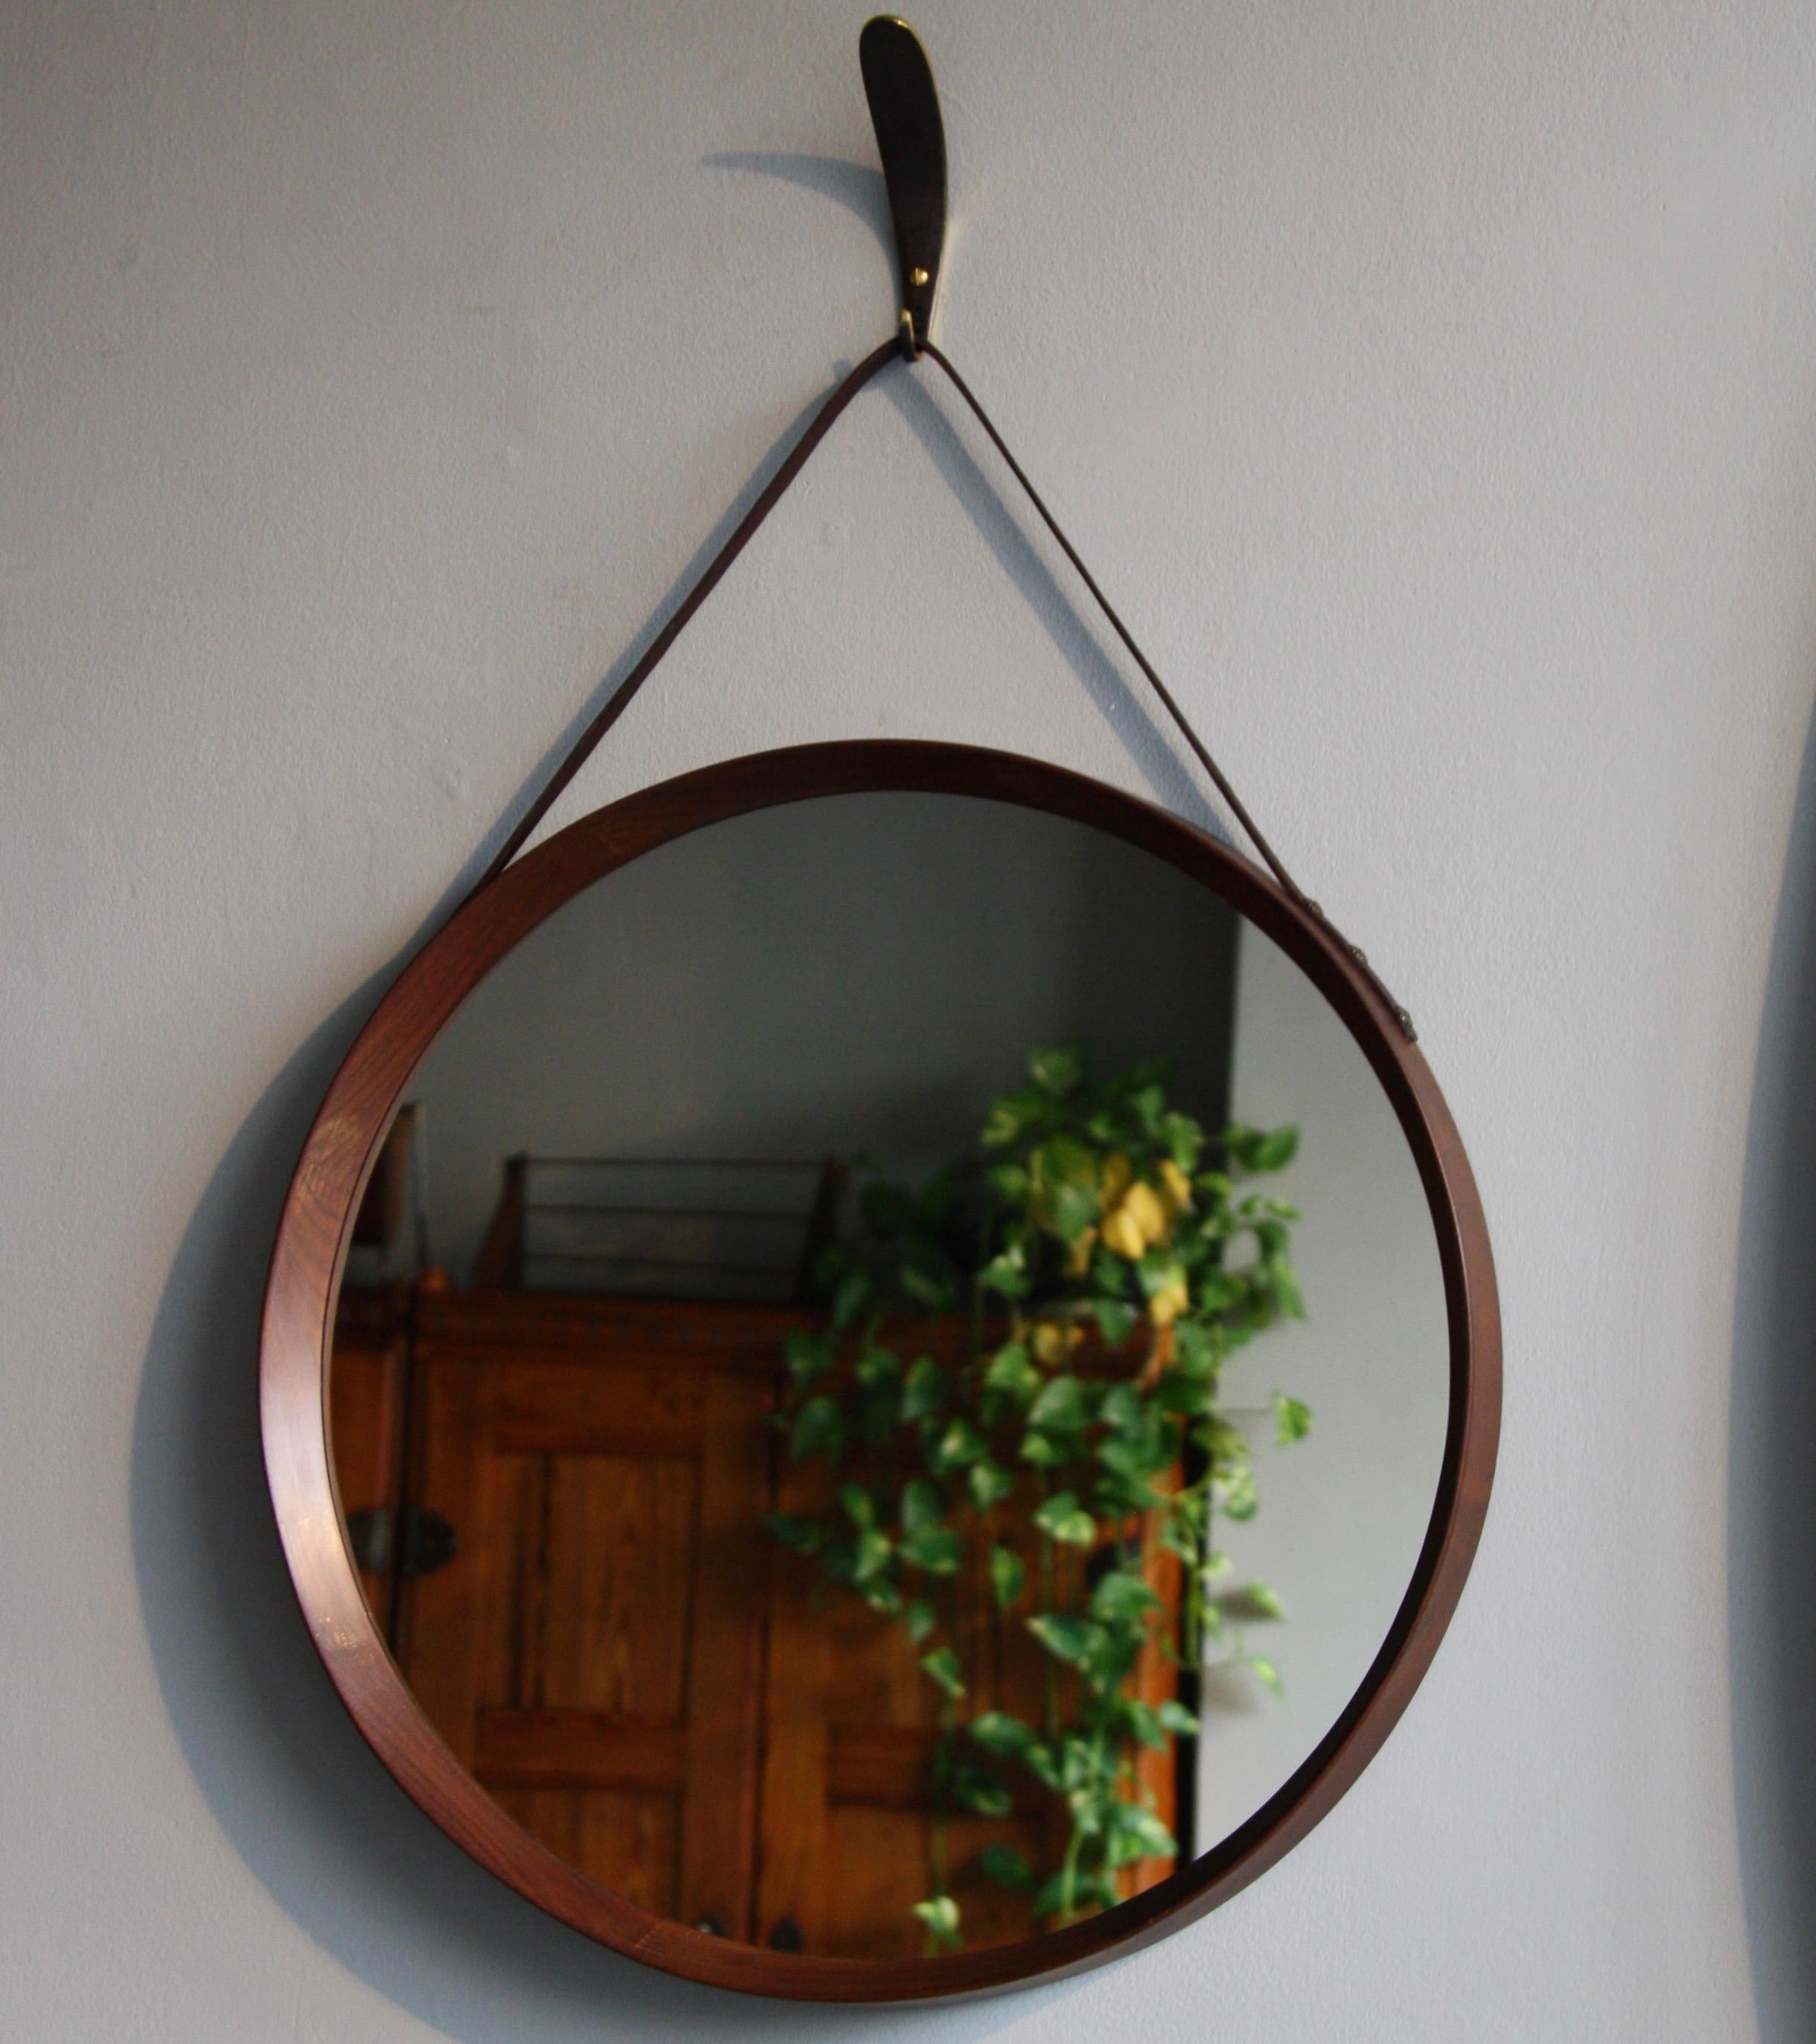 A vintage round wall mirror made in Denmark, circa 1950. The mirror is made of sections of solid teak wood which are joined together using finger joints. This exposed construction and the tapering of the wood towards the front of the mirror are the